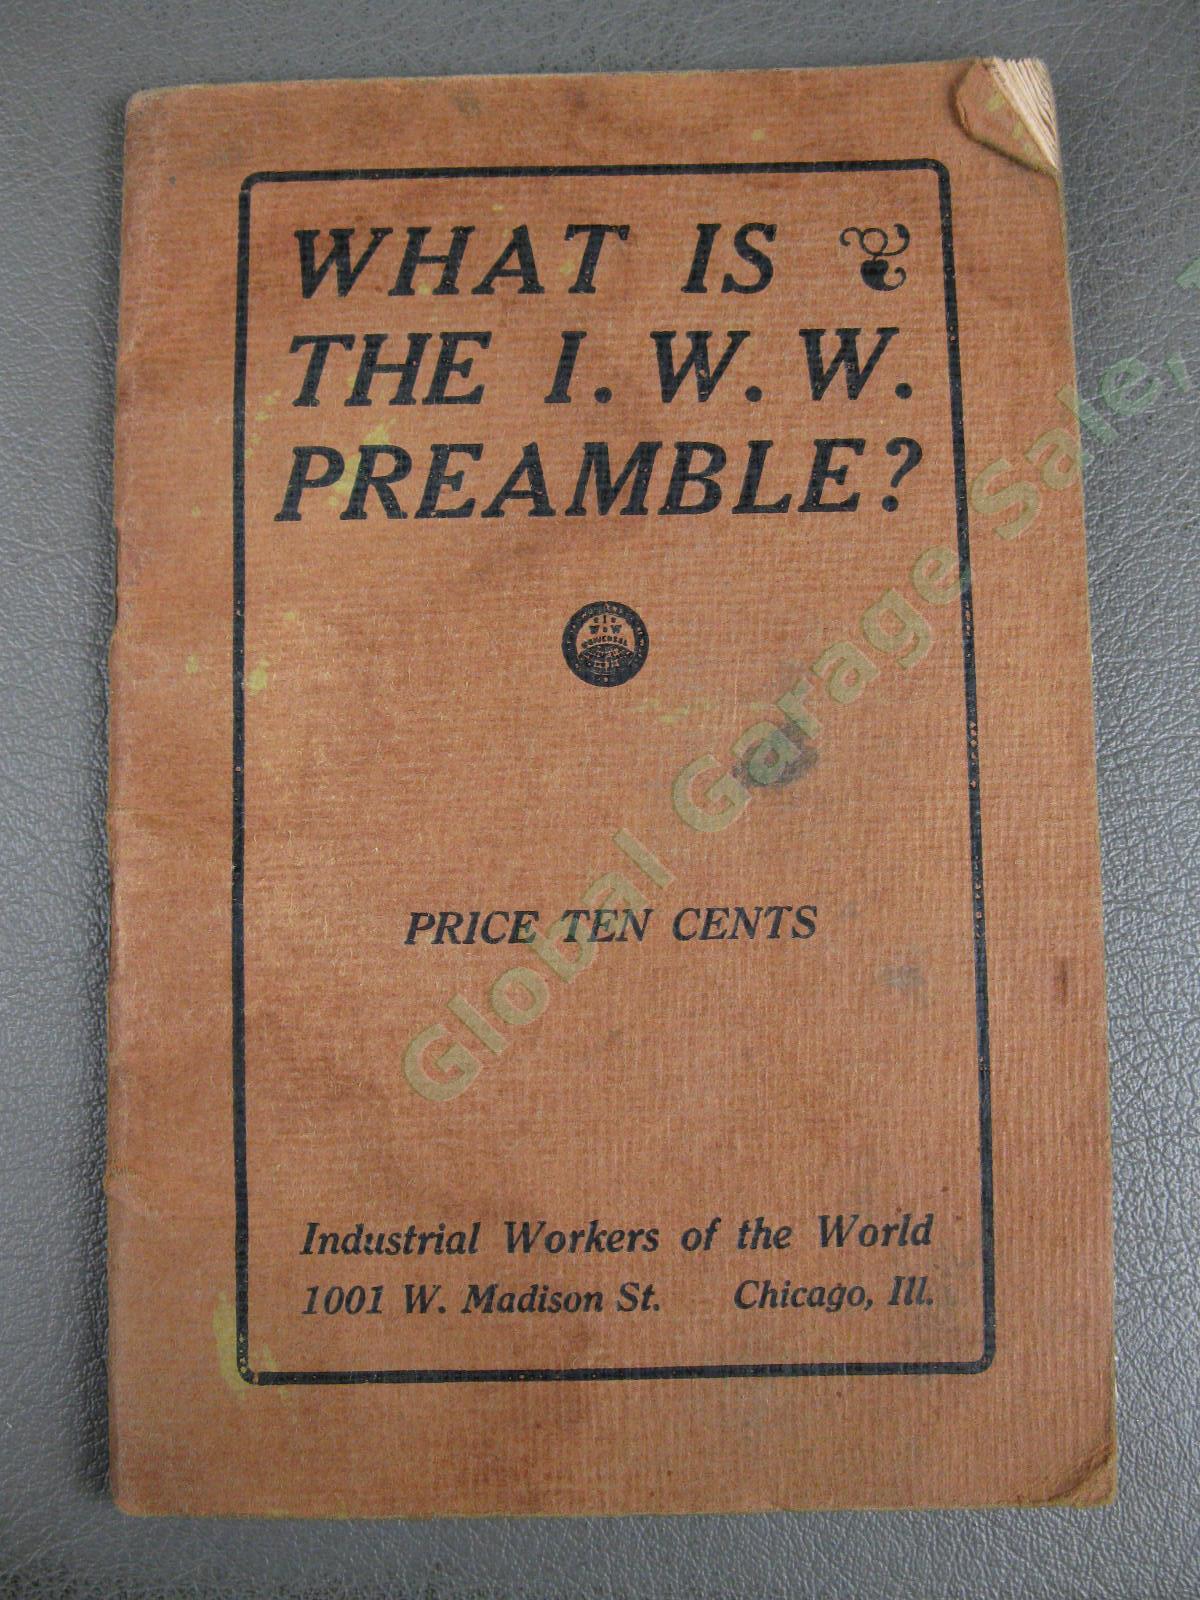 RARE Wobblie Book What is the IWW Preamble Industrial Workers of the World Union